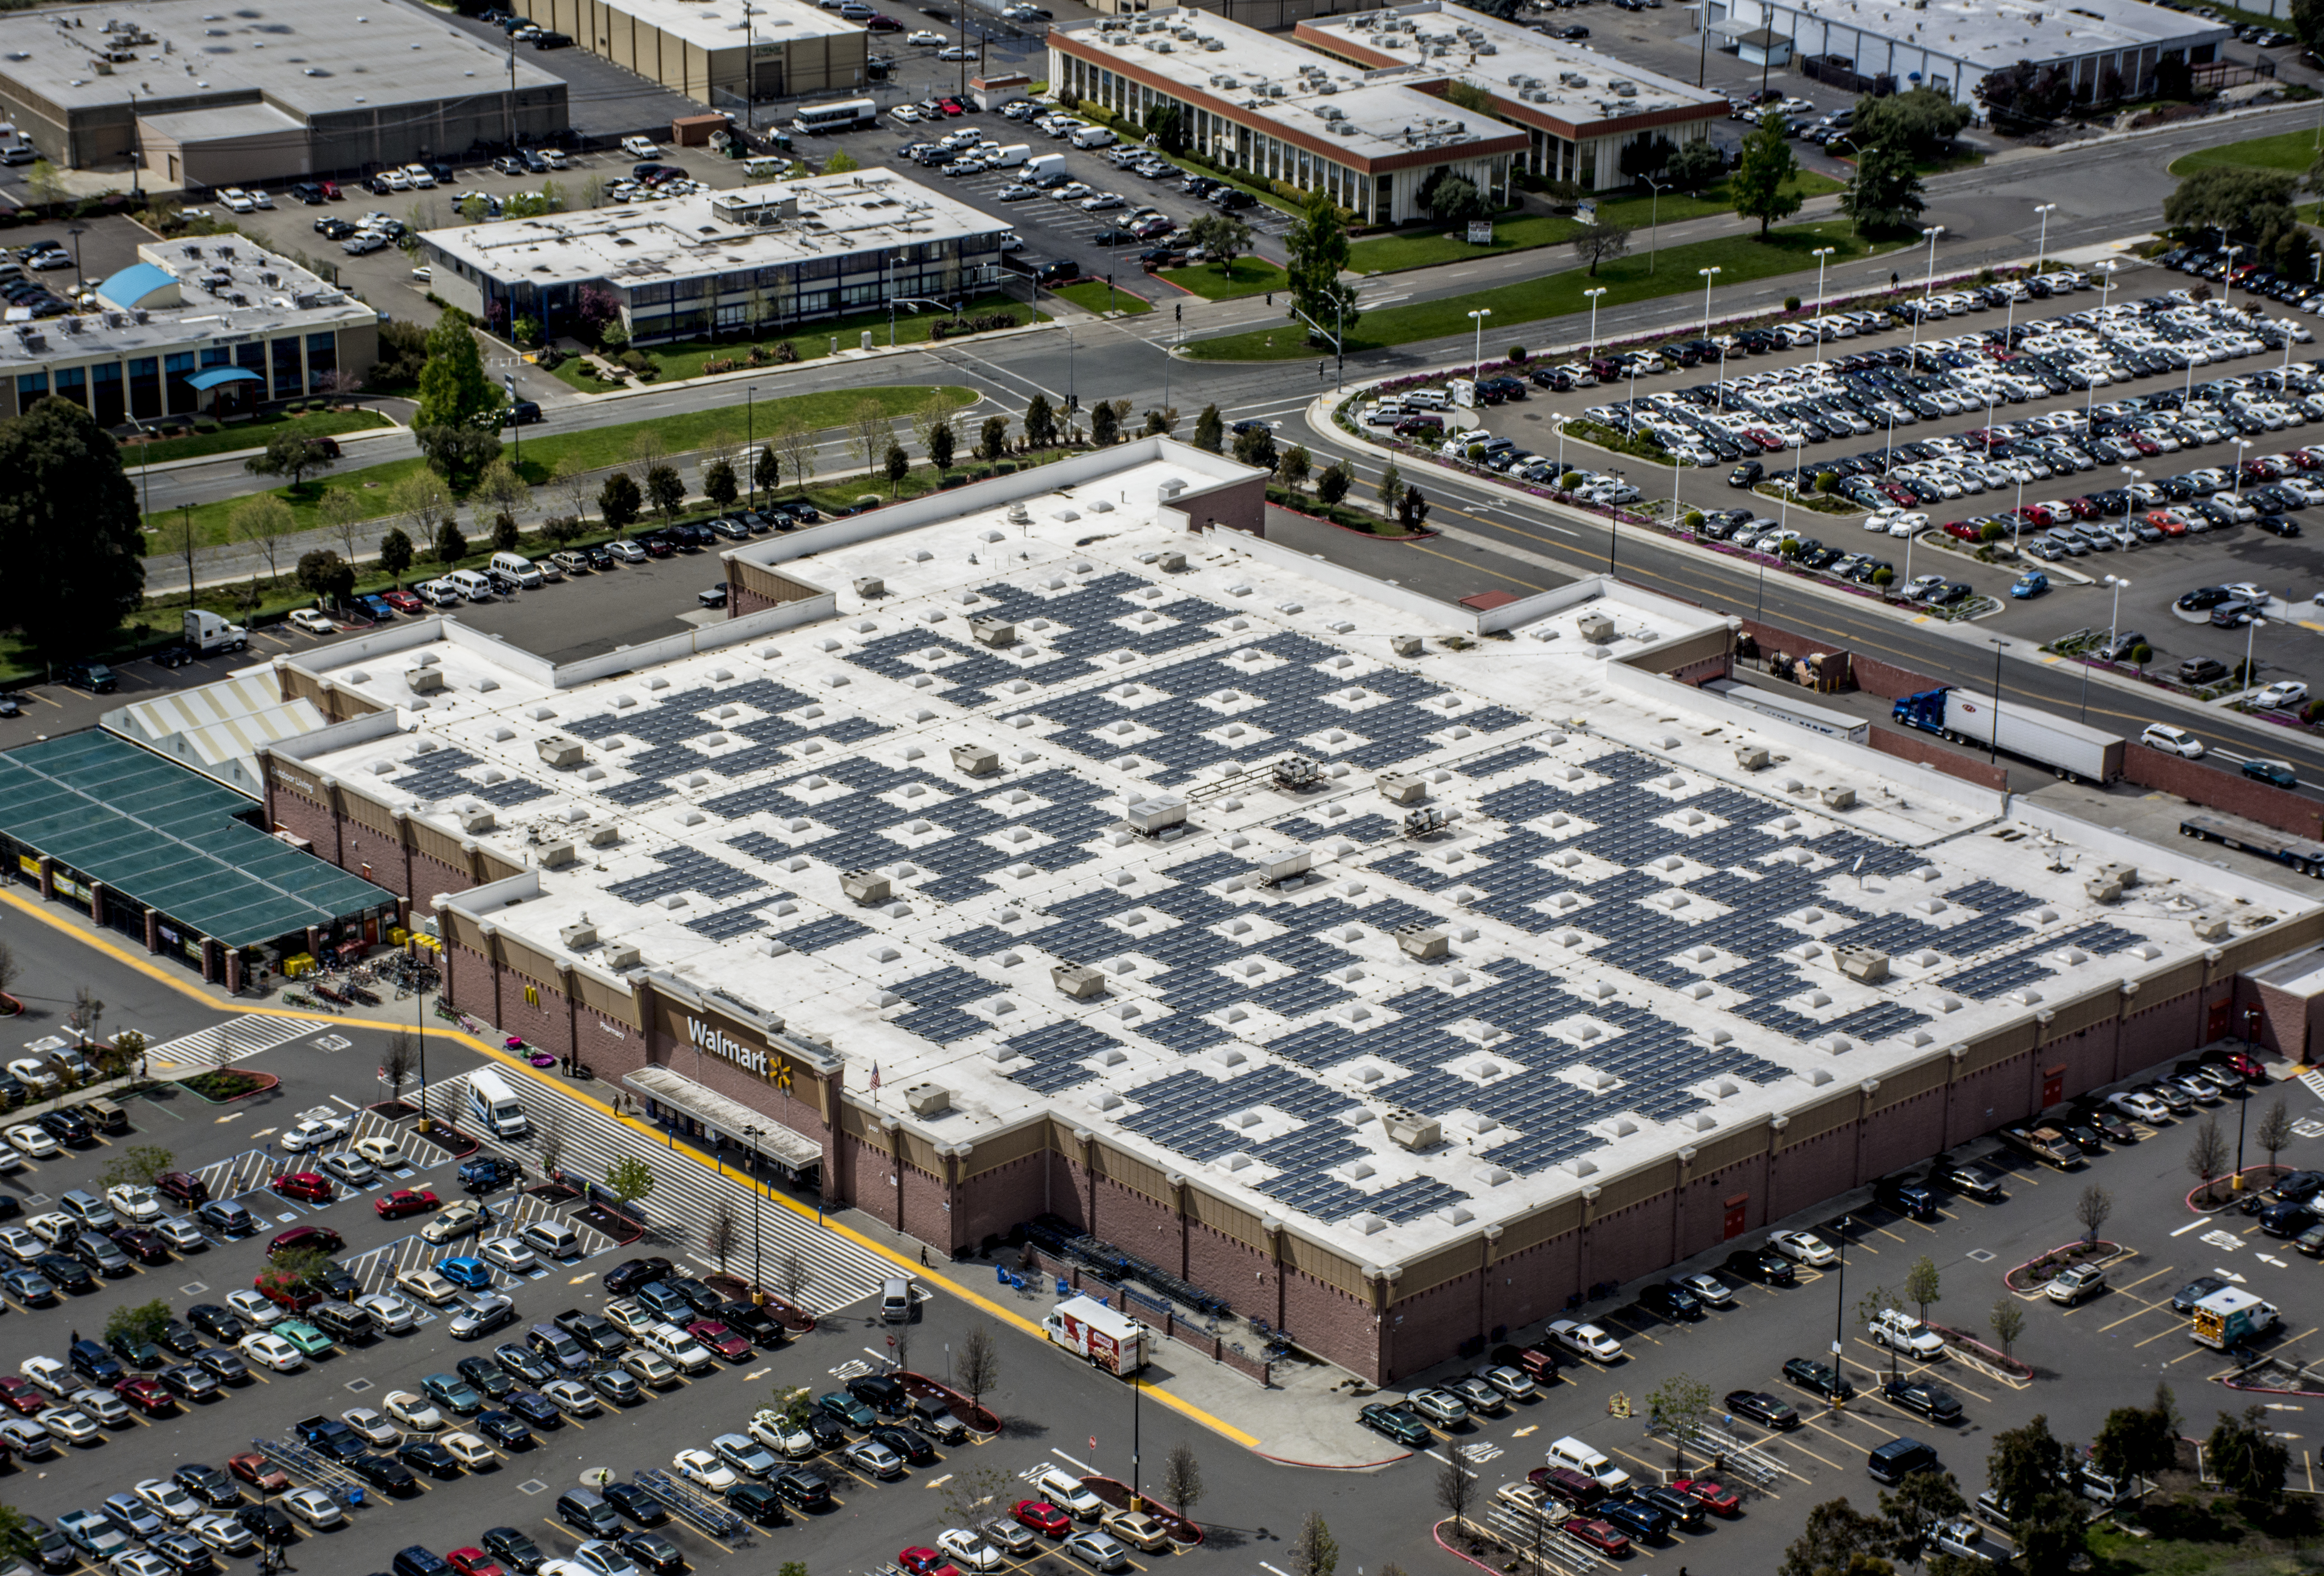 The Latest Competition Between Walmart vs. Target Is All About Solar Panels, Not Low Prices